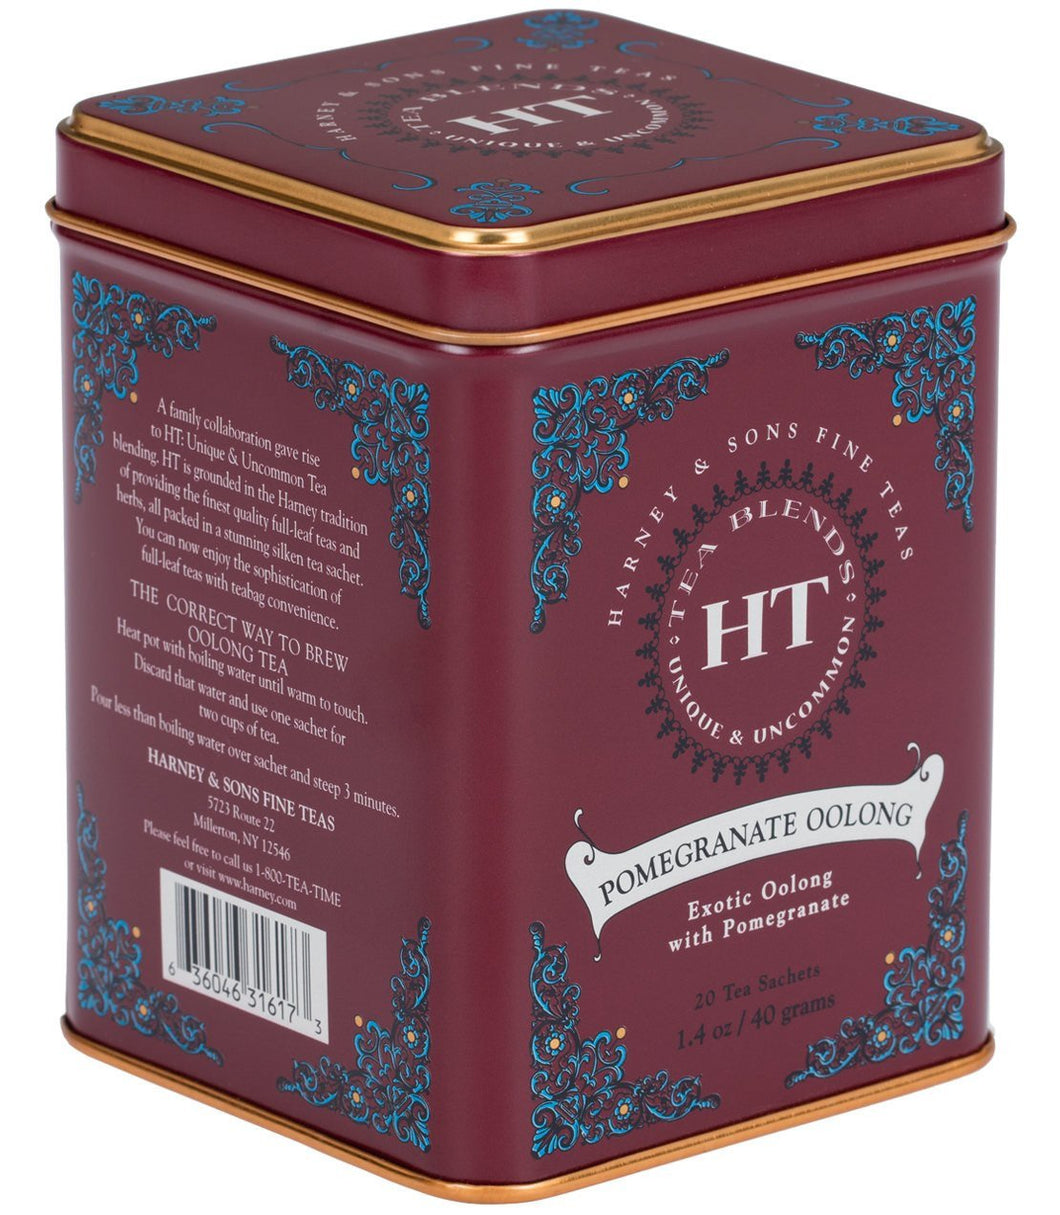 Harney & Sons - Pomegranate Oolong